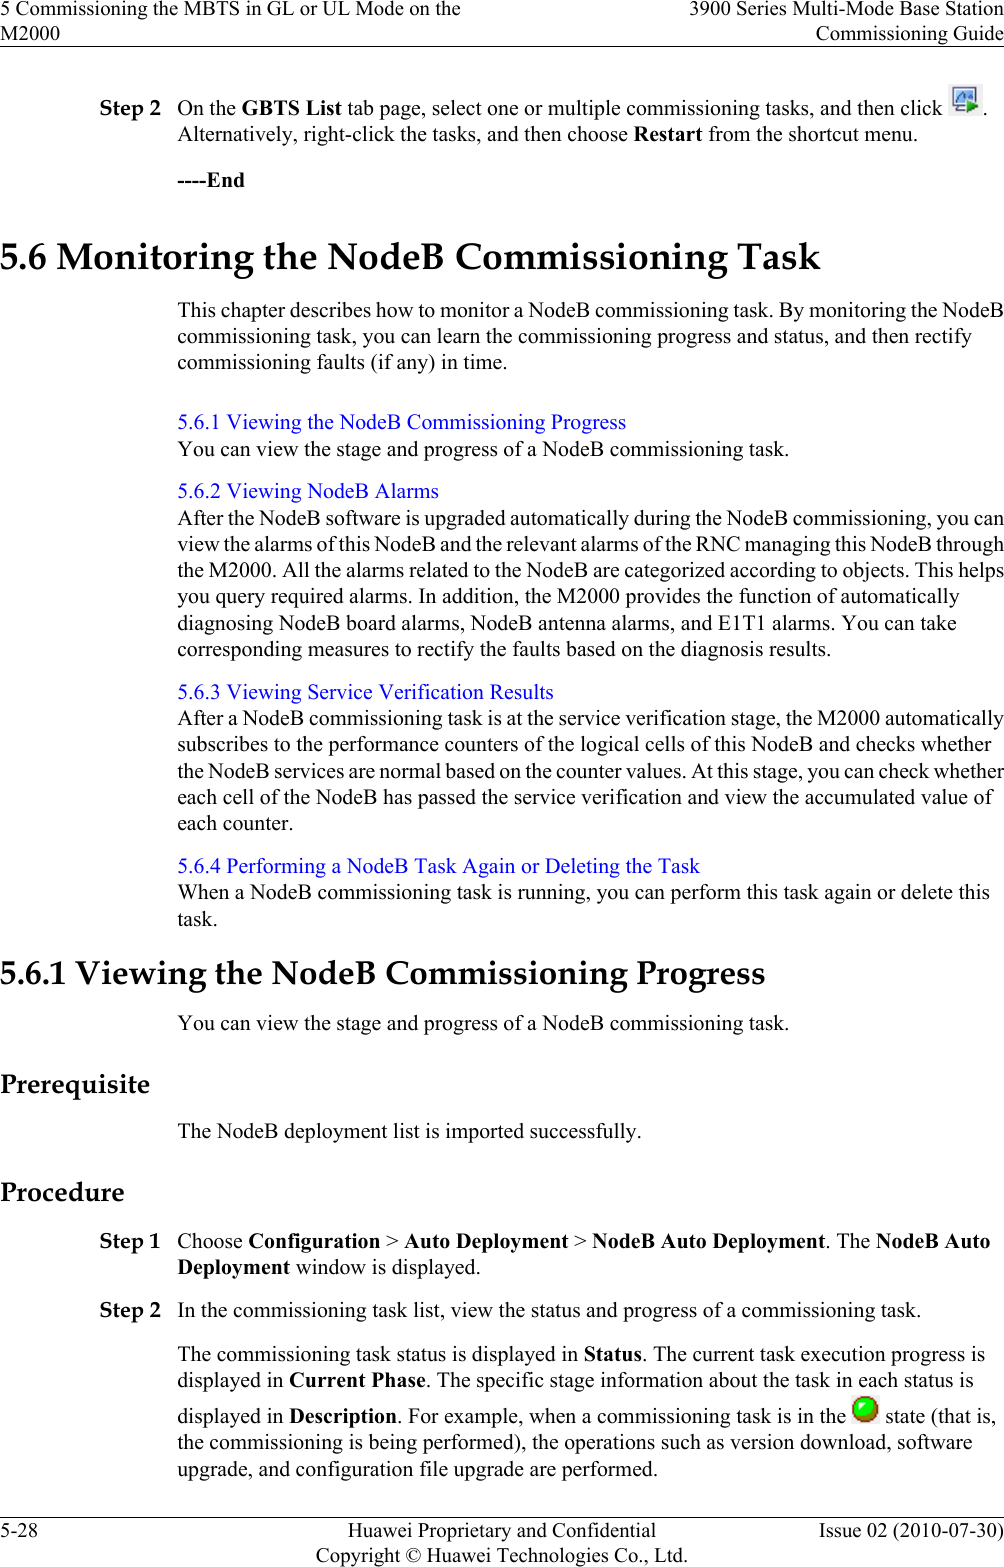 Step 2 On the GBTS List tab page, select one or multiple commissioning tasks, and then click  .Alternatively, right-click the tasks, and then choose Restart from the shortcut menu.----End5.6 Monitoring the NodeB Commissioning TaskThis chapter describes how to monitor a NodeB commissioning task. By monitoring the NodeBcommissioning task, you can learn the commissioning progress and status, and then rectifycommissioning faults (if any) in time.5.6.1 Viewing the NodeB Commissioning ProgressYou can view the stage and progress of a NodeB commissioning task.5.6.2 Viewing NodeB AlarmsAfter the NodeB software is upgraded automatically during the NodeB commissioning, you canview the alarms of this NodeB and the relevant alarms of the RNC managing this NodeB throughthe M2000. All the alarms related to the NodeB are categorized according to objects. This helpsyou query required alarms. In addition, the M2000 provides the function of automaticallydiagnosing NodeB board alarms, NodeB antenna alarms, and E1T1 alarms. You can takecorresponding measures to rectify the faults based on the diagnosis results.5.6.3 Viewing Service Verification ResultsAfter a NodeB commissioning task is at the service verification stage, the M2000 automaticallysubscribes to the performance counters of the logical cells of this NodeB and checks whetherthe NodeB services are normal based on the counter values. At this stage, you can check whethereach cell of the NodeB has passed the service verification and view the accumulated value ofeach counter.5.6.4 Performing a NodeB Task Again or Deleting the TaskWhen a NodeB commissioning task is running, you can perform this task again or delete thistask.5.6.1 Viewing the NodeB Commissioning ProgressYou can view the stage and progress of a NodeB commissioning task.PrerequisiteThe NodeB deployment list is imported successfully.ProcedureStep 1 Choose Configuration &gt; Auto Deployment &gt; NodeB Auto Deployment. The NodeB AutoDeployment window is displayed.Step 2 In the commissioning task list, view the status and progress of a commissioning task.The commissioning task status is displayed in Status. The current task execution progress isdisplayed in Current Phase. The specific stage information about the task in each status isdisplayed in Description. For example, when a commissioning task is in the   state (that is,the commissioning is being performed), the operations such as version download, softwareupgrade, and configuration file upgrade are performed.5 Commissioning the MBTS in GL or UL Mode on theM20003900 Series Multi-Mode Base StationCommissioning Guide5-28 Huawei Proprietary and ConfidentialCopyright © Huawei Technologies Co., Ltd.Issue 02 (2010-07-30)